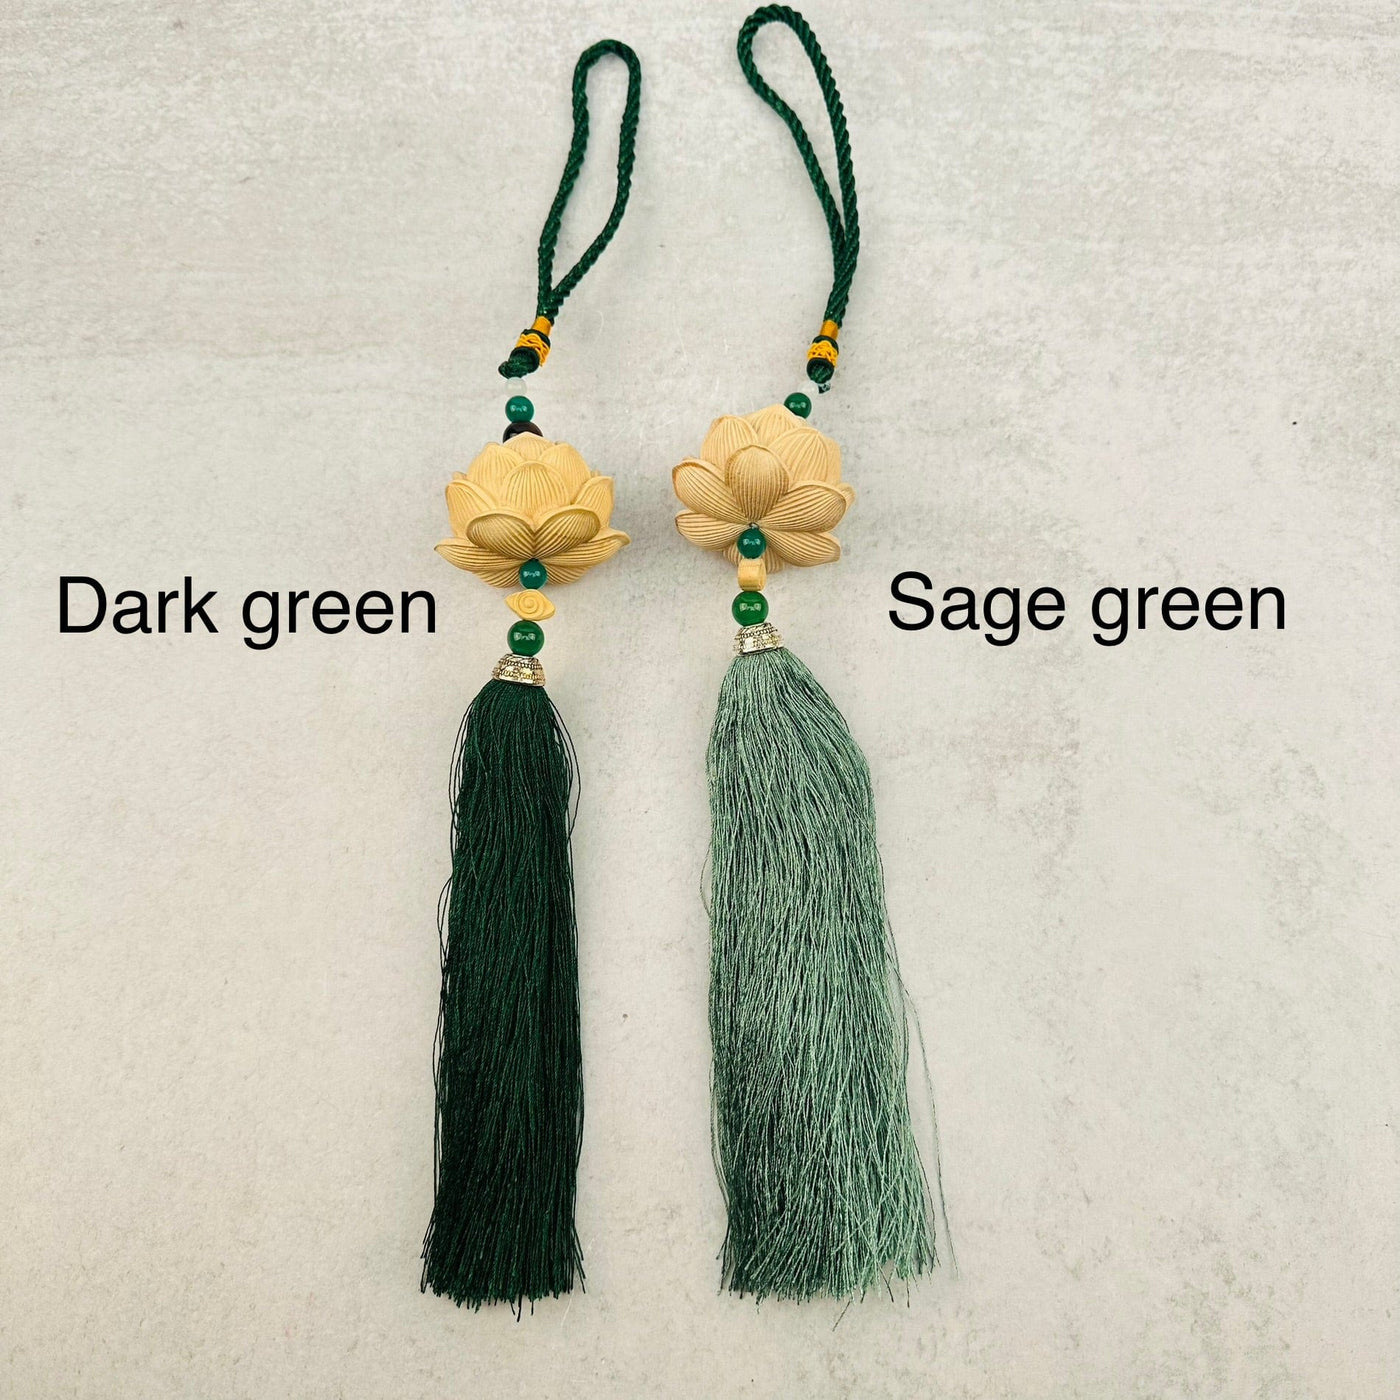 sage green and dark green tassels displayed next to each other to show the differences in the color shades 